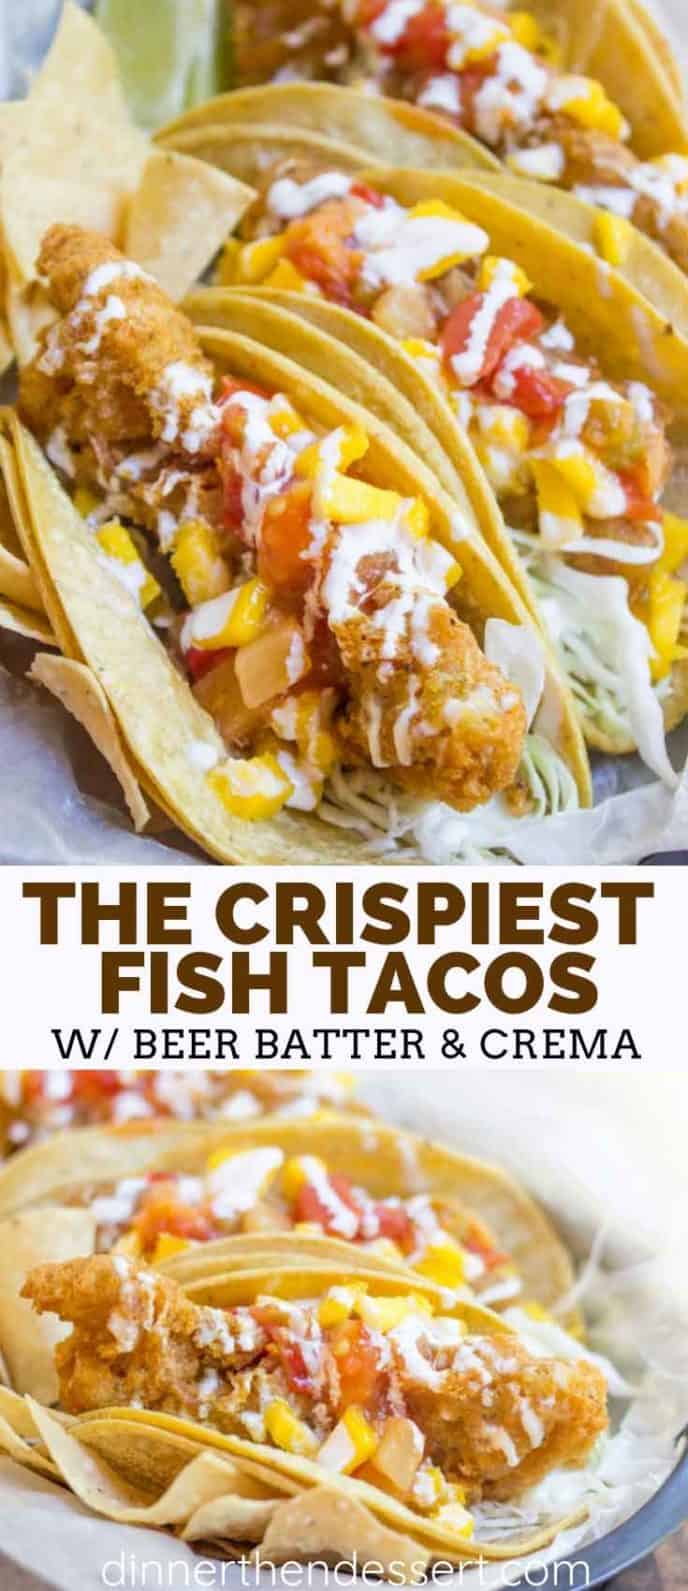 The Crispiest Fish Tacos with Cod and Beer Batter